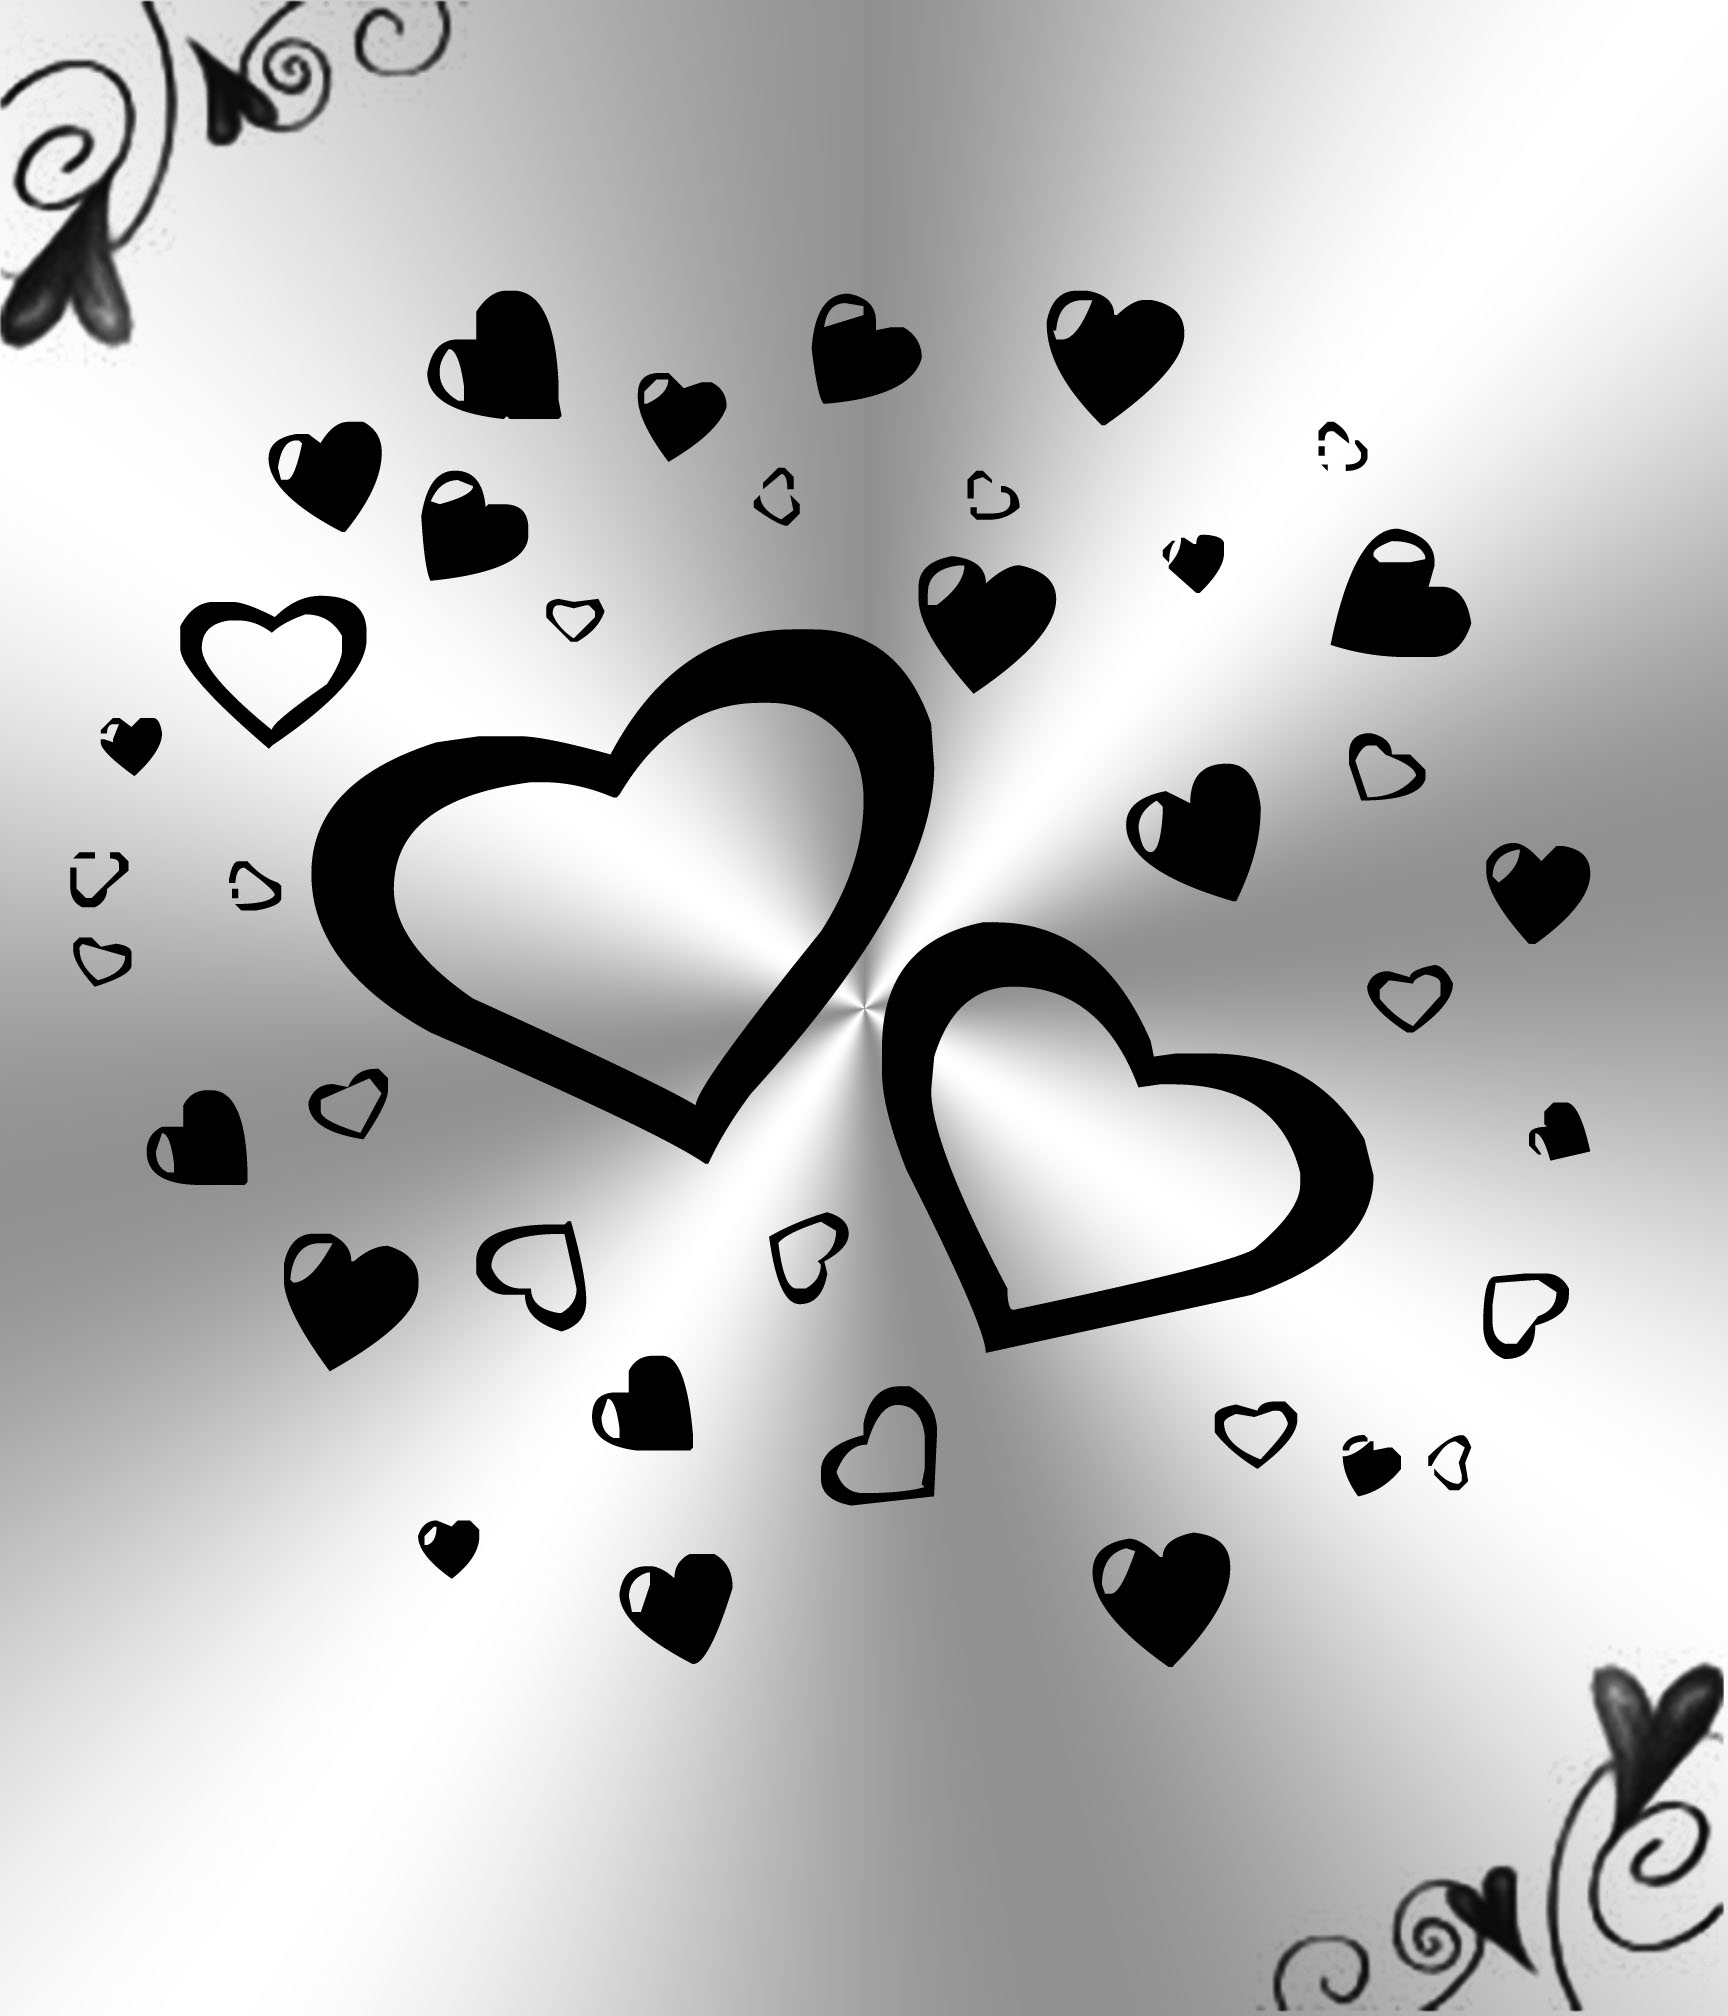 Black Heart Photos Download The BEST Free Black Heart Stock Photos  HD  Images